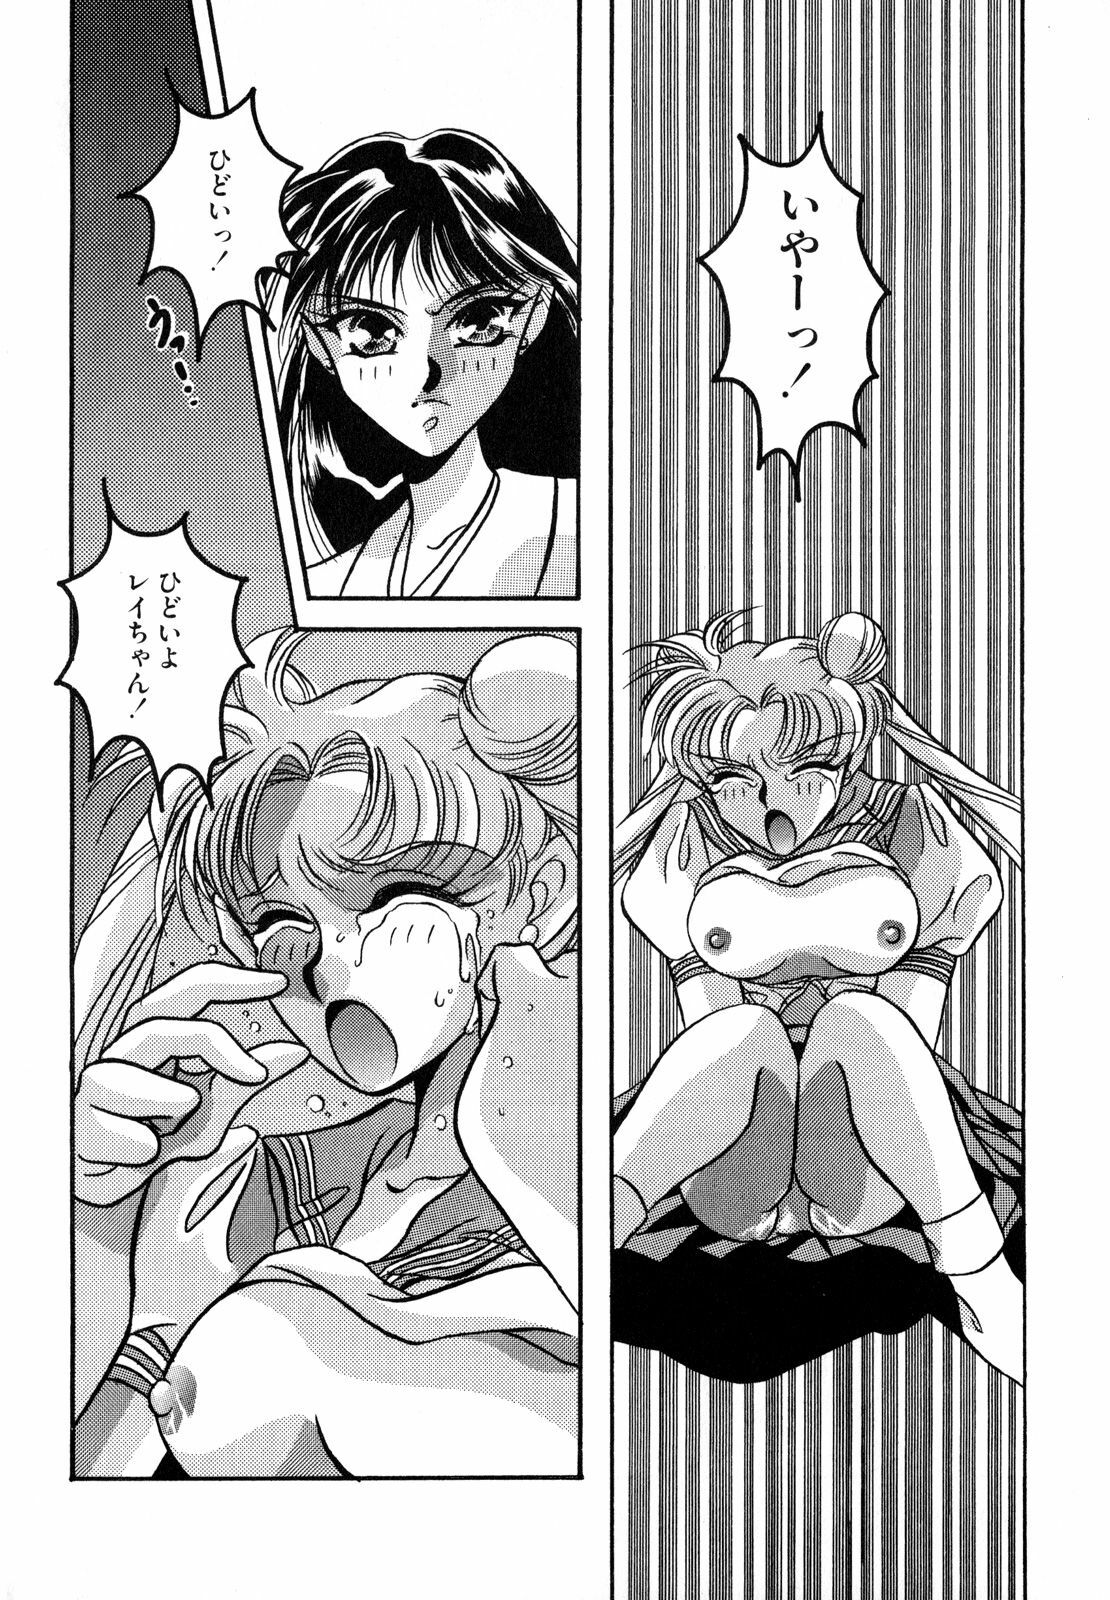 [Anthology] Lunatic Party 2 (Sailor Moon) page 41 full